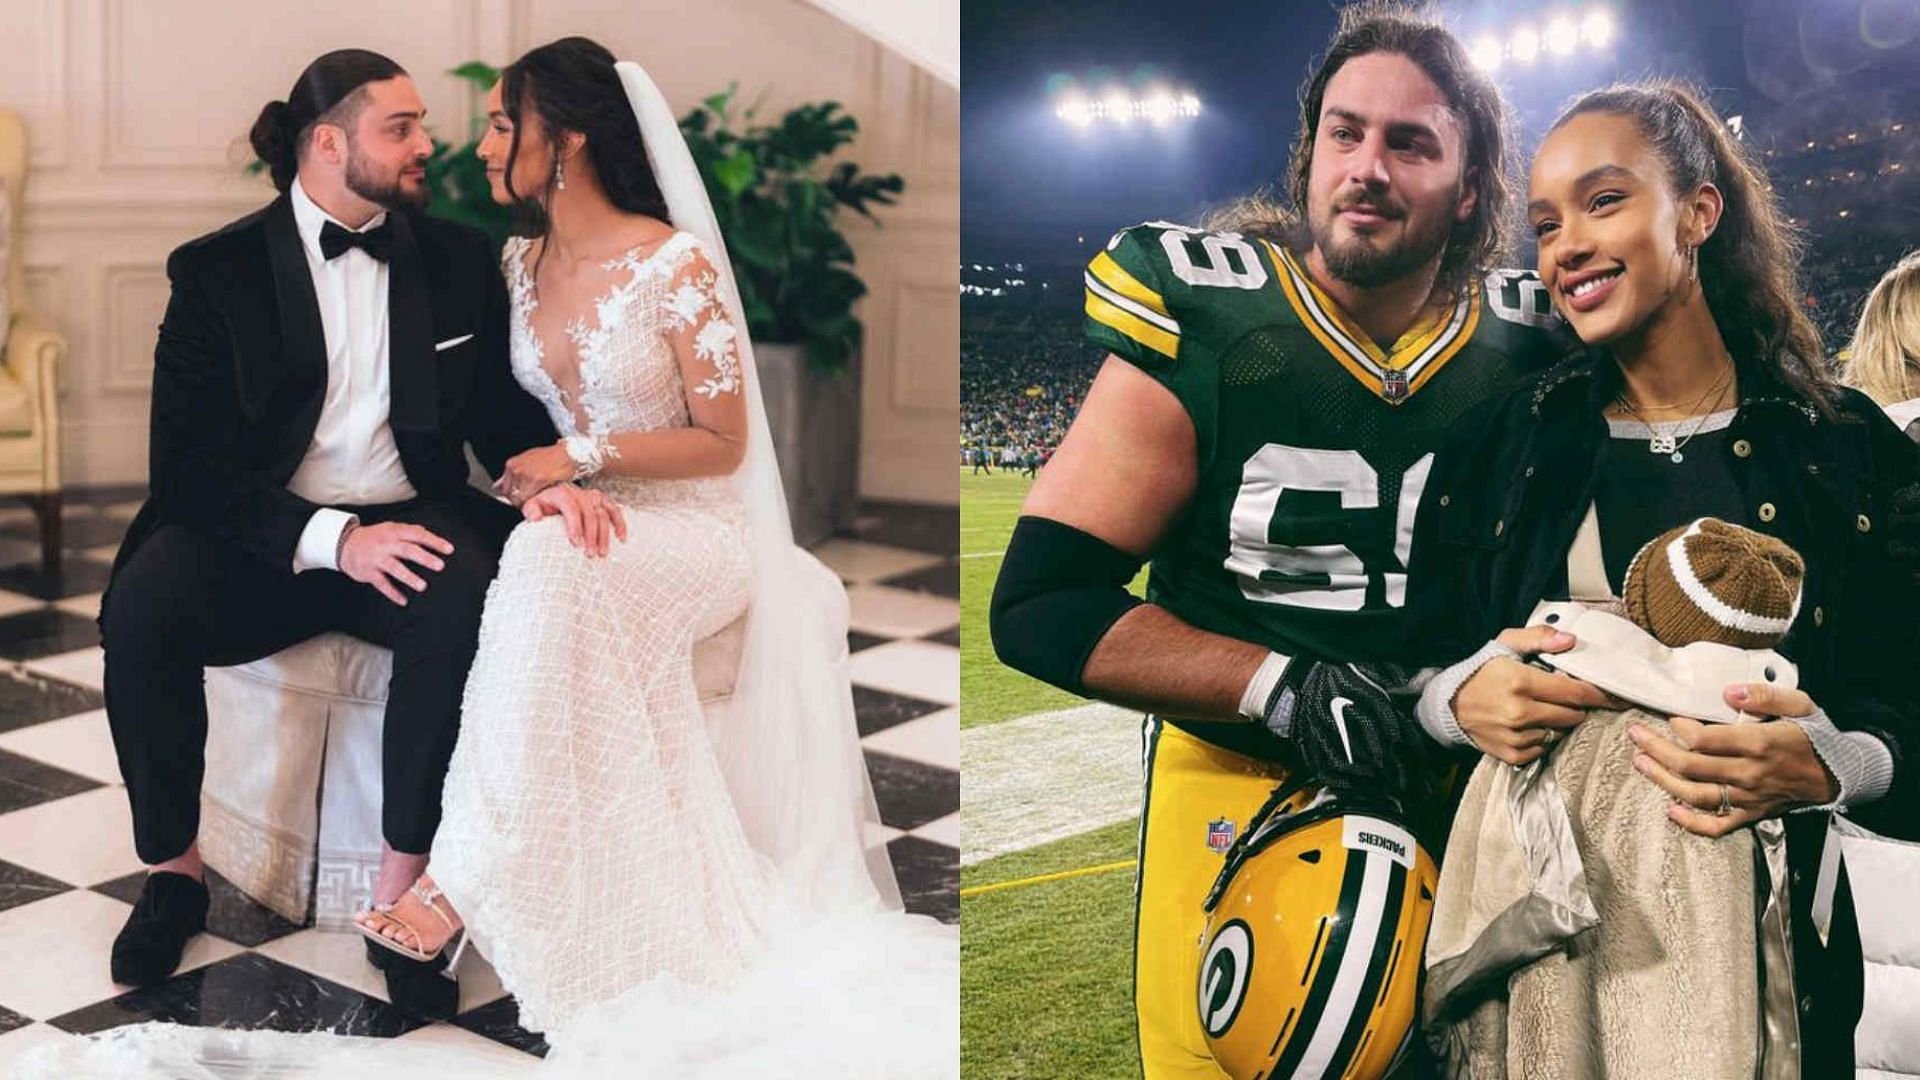 Know about the wholesome relationship of Frankie and David Bakhtiari.